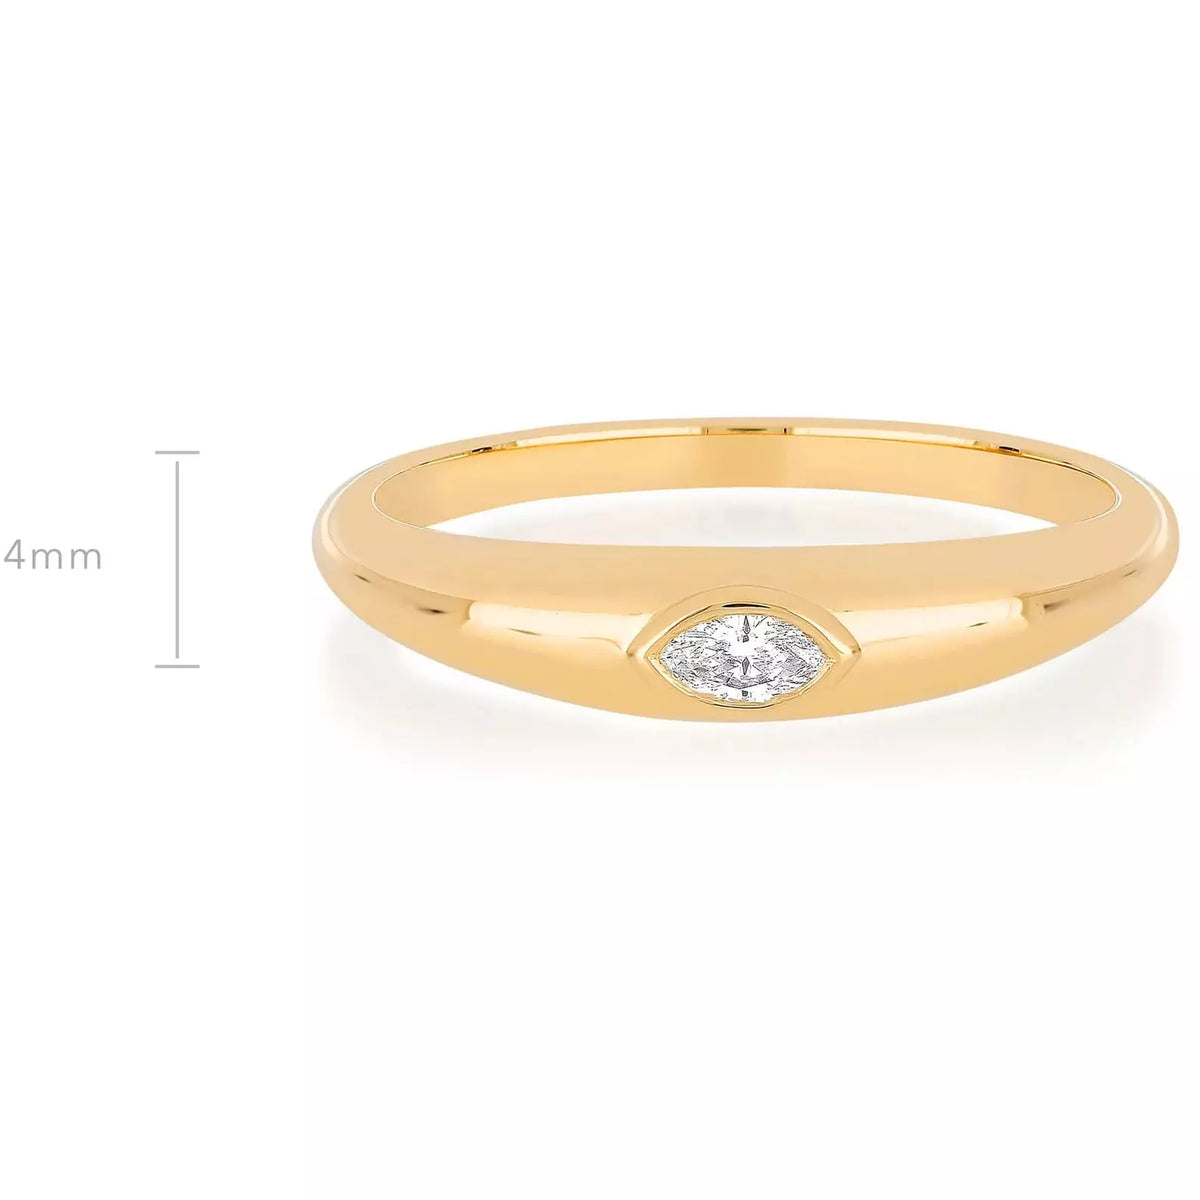 Gold Dome Ring With Diamond Marquise Center